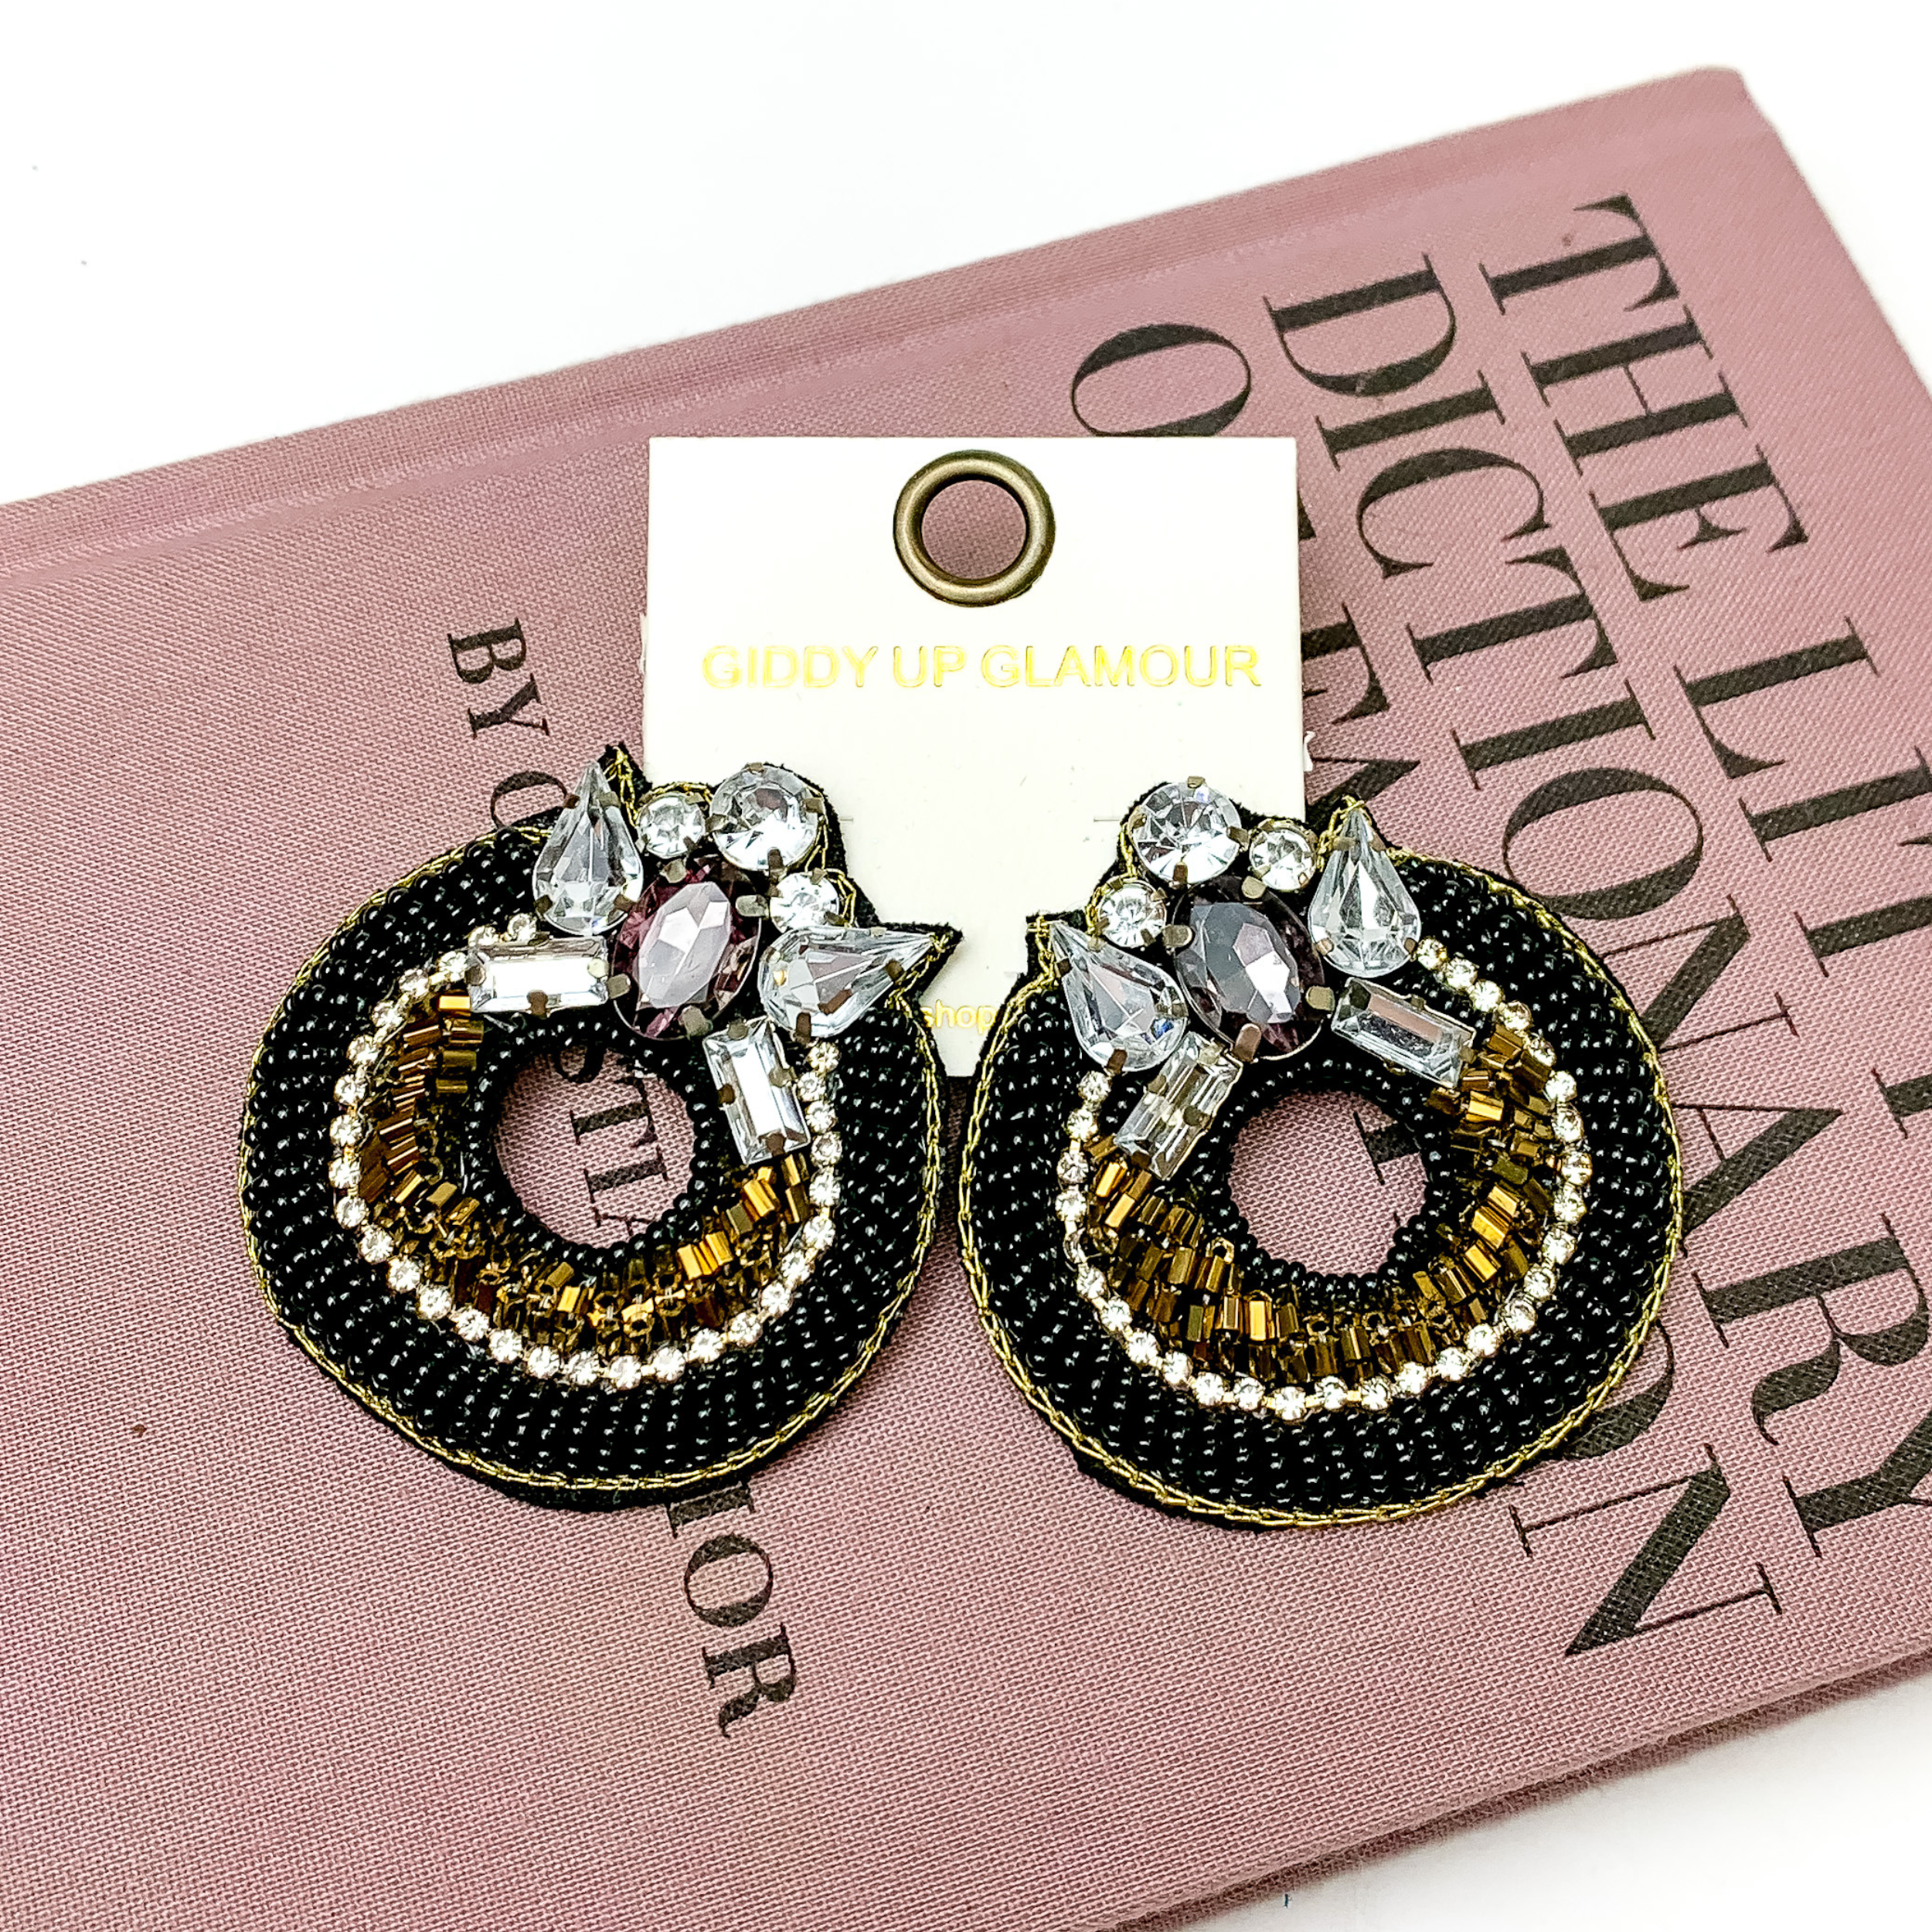 Pictured is a pair of beaded black earrings with a jeweled detail at the top. . These earrings are pictured in a white background with pink fashion dictionary.